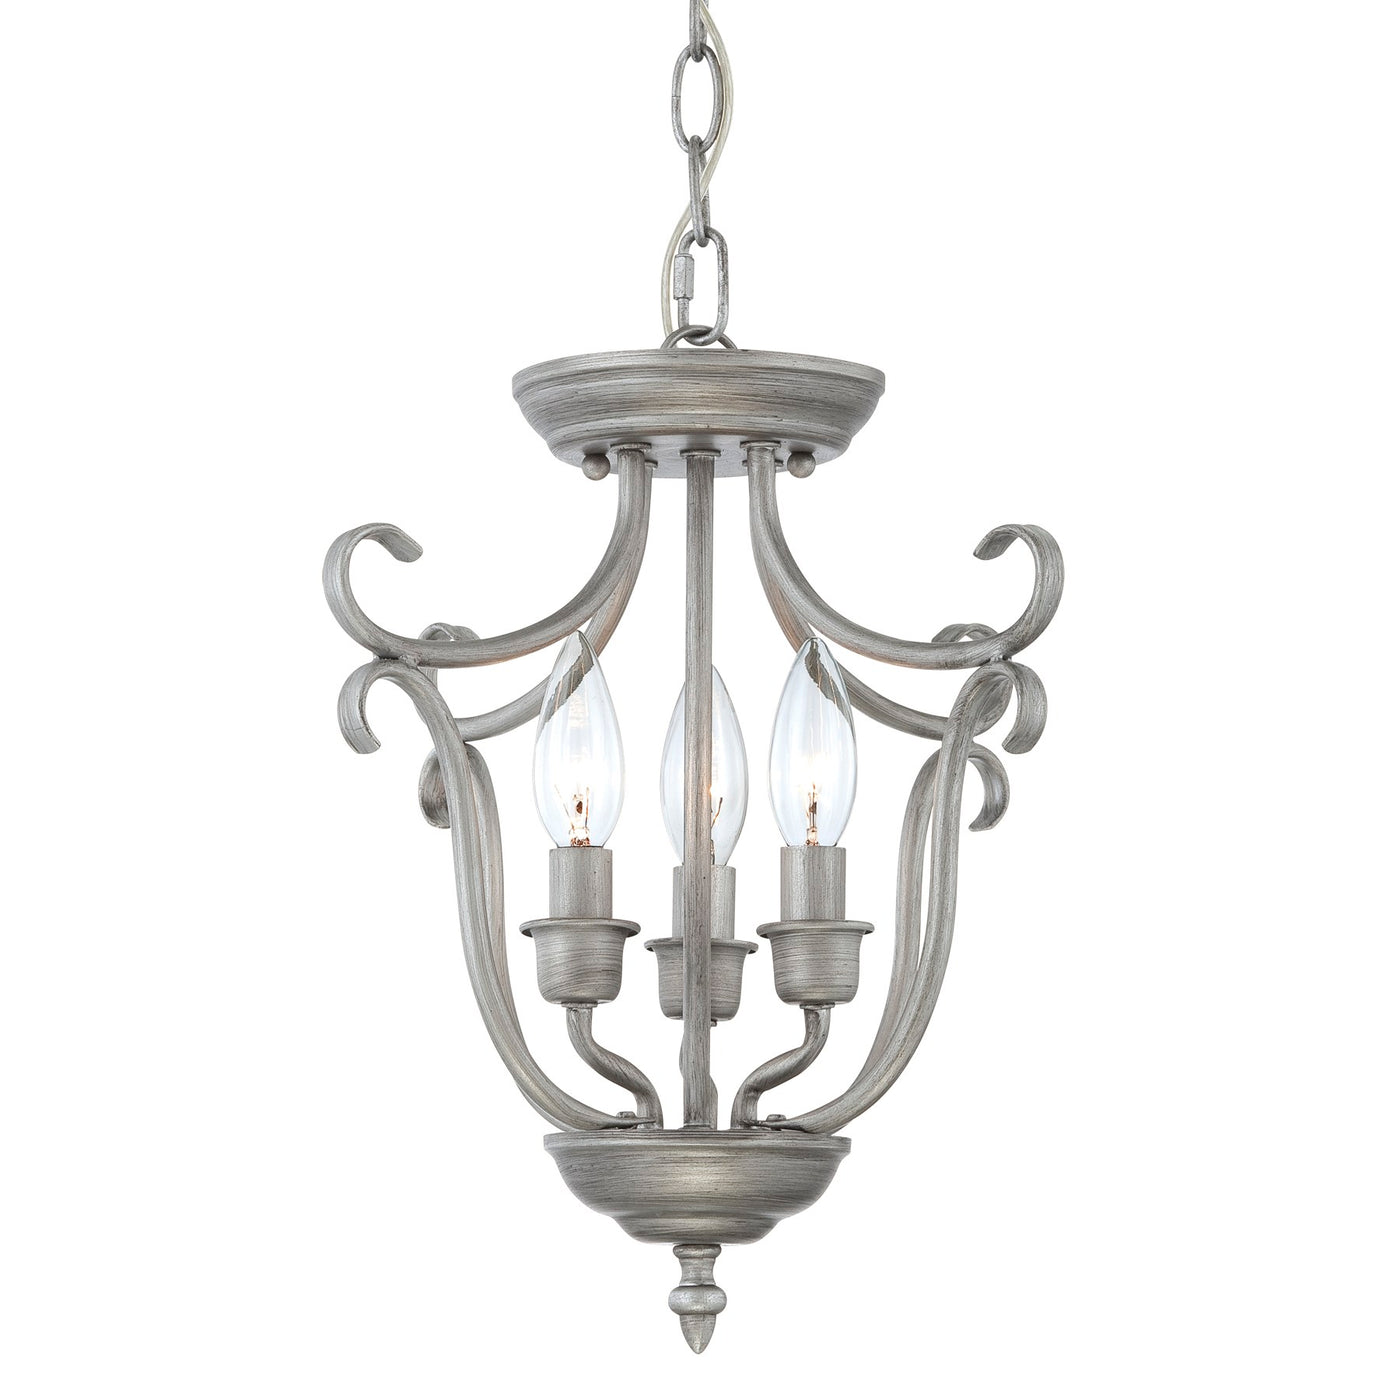 Millennium Lightings Fulton Pendant Offered in Rubbed Silver finish, Item Number 1323-RS